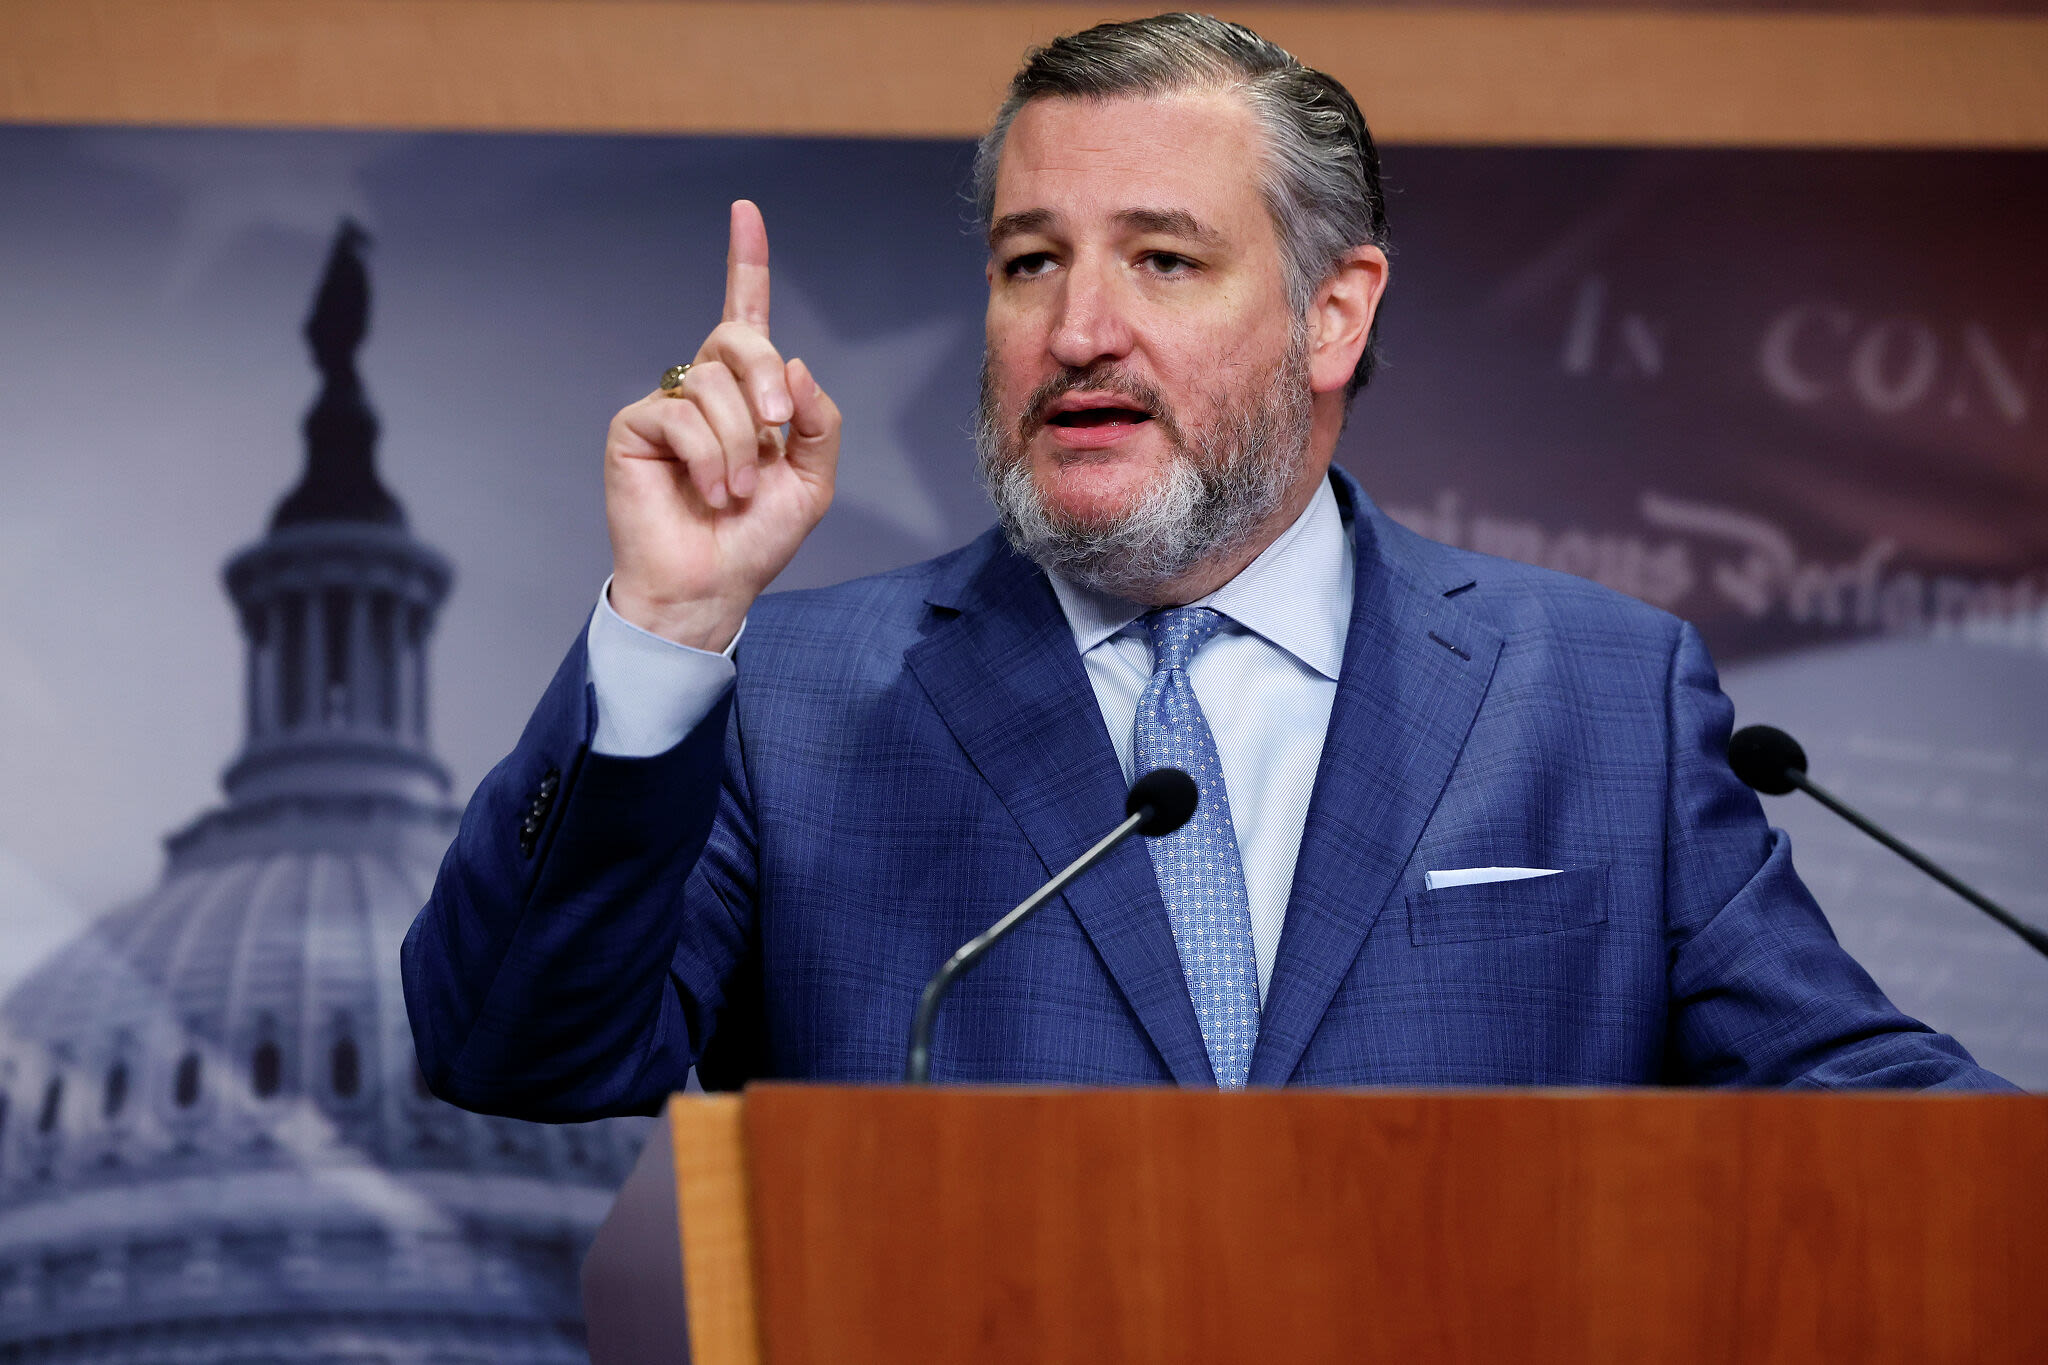 Ted Cruz filed IVF protection bill. What about embryo rights?